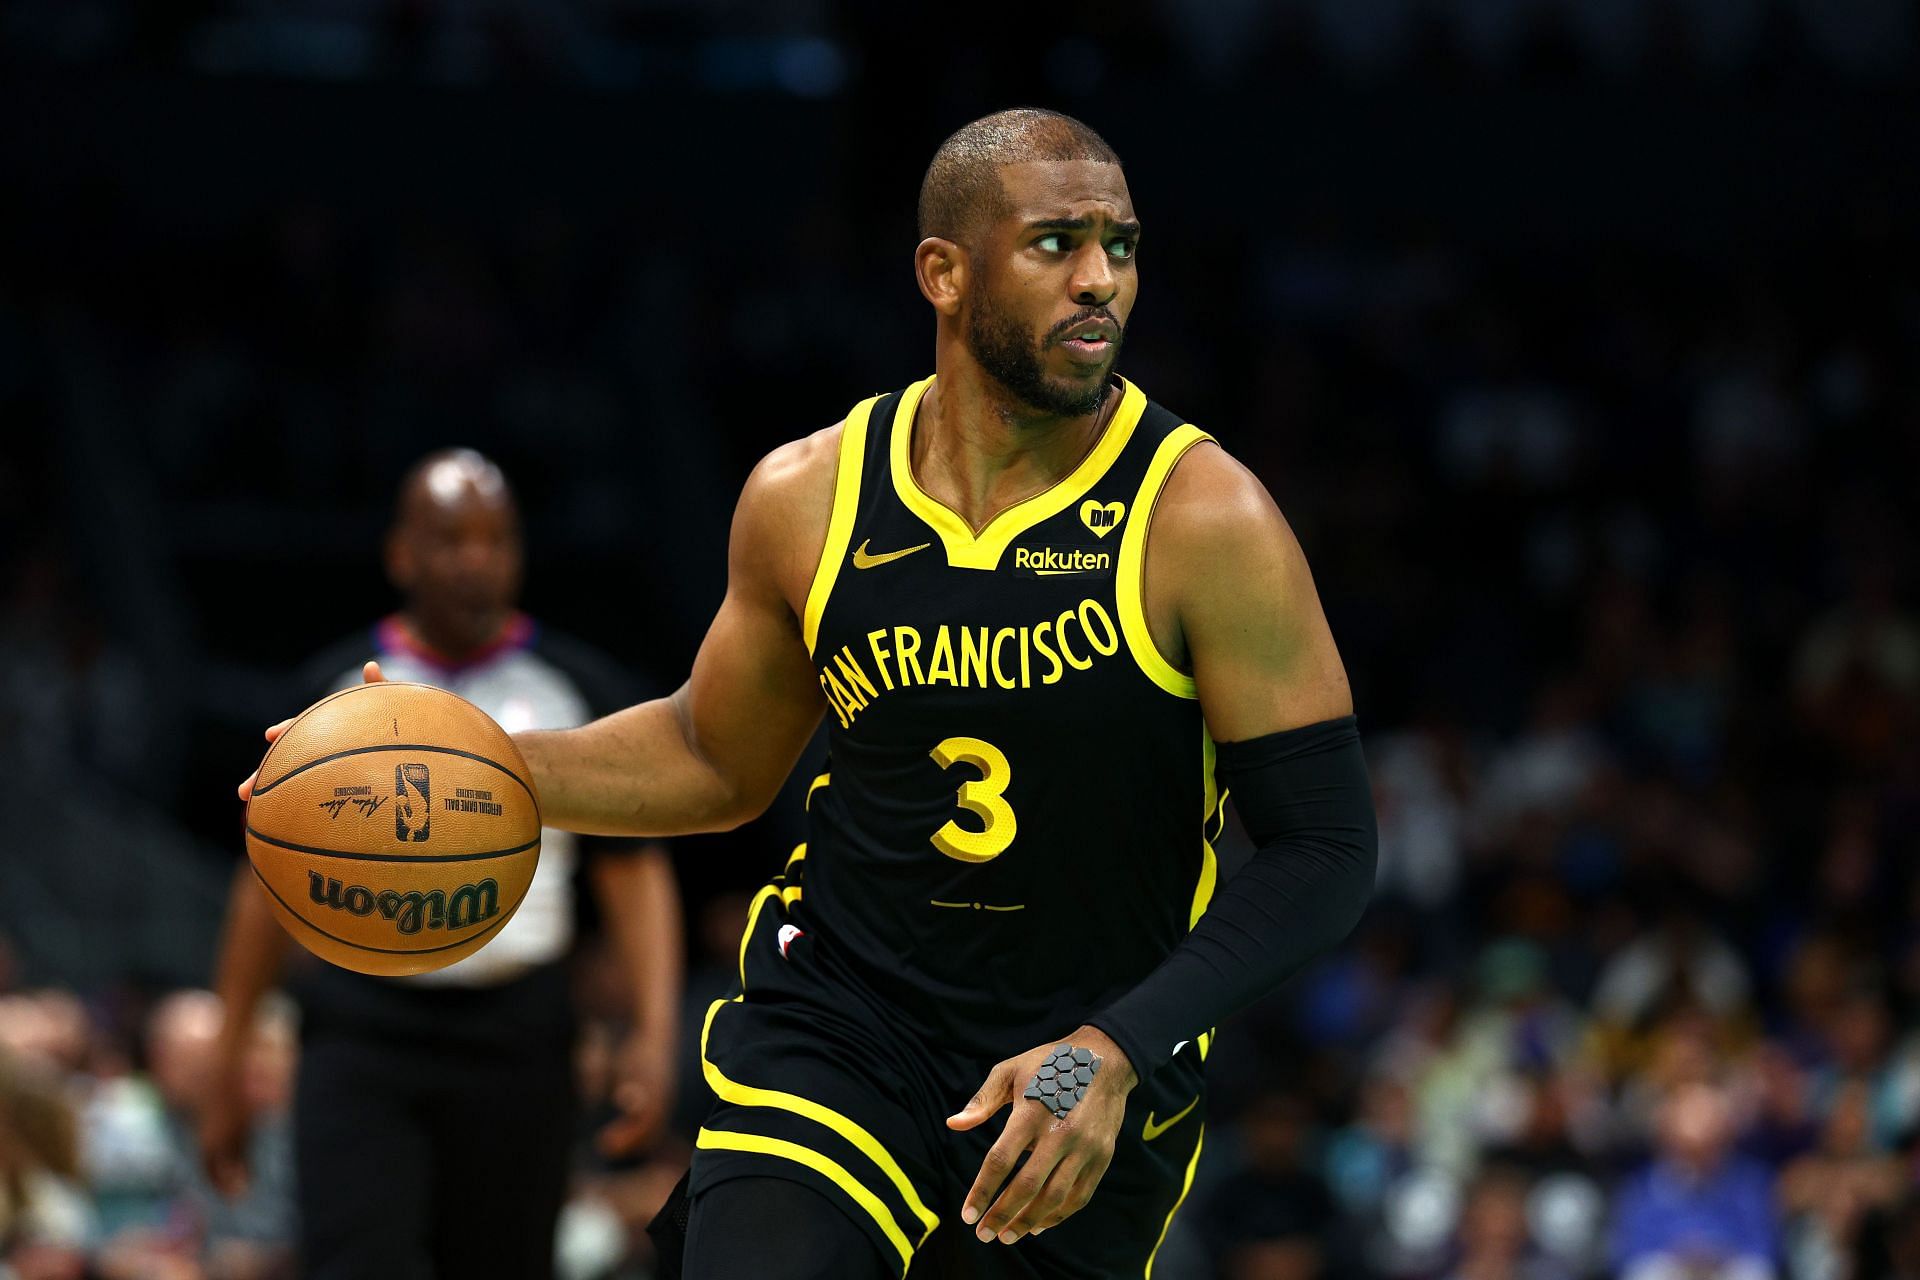 Could Chris Paul help mentor Devin Carter into the NBA?